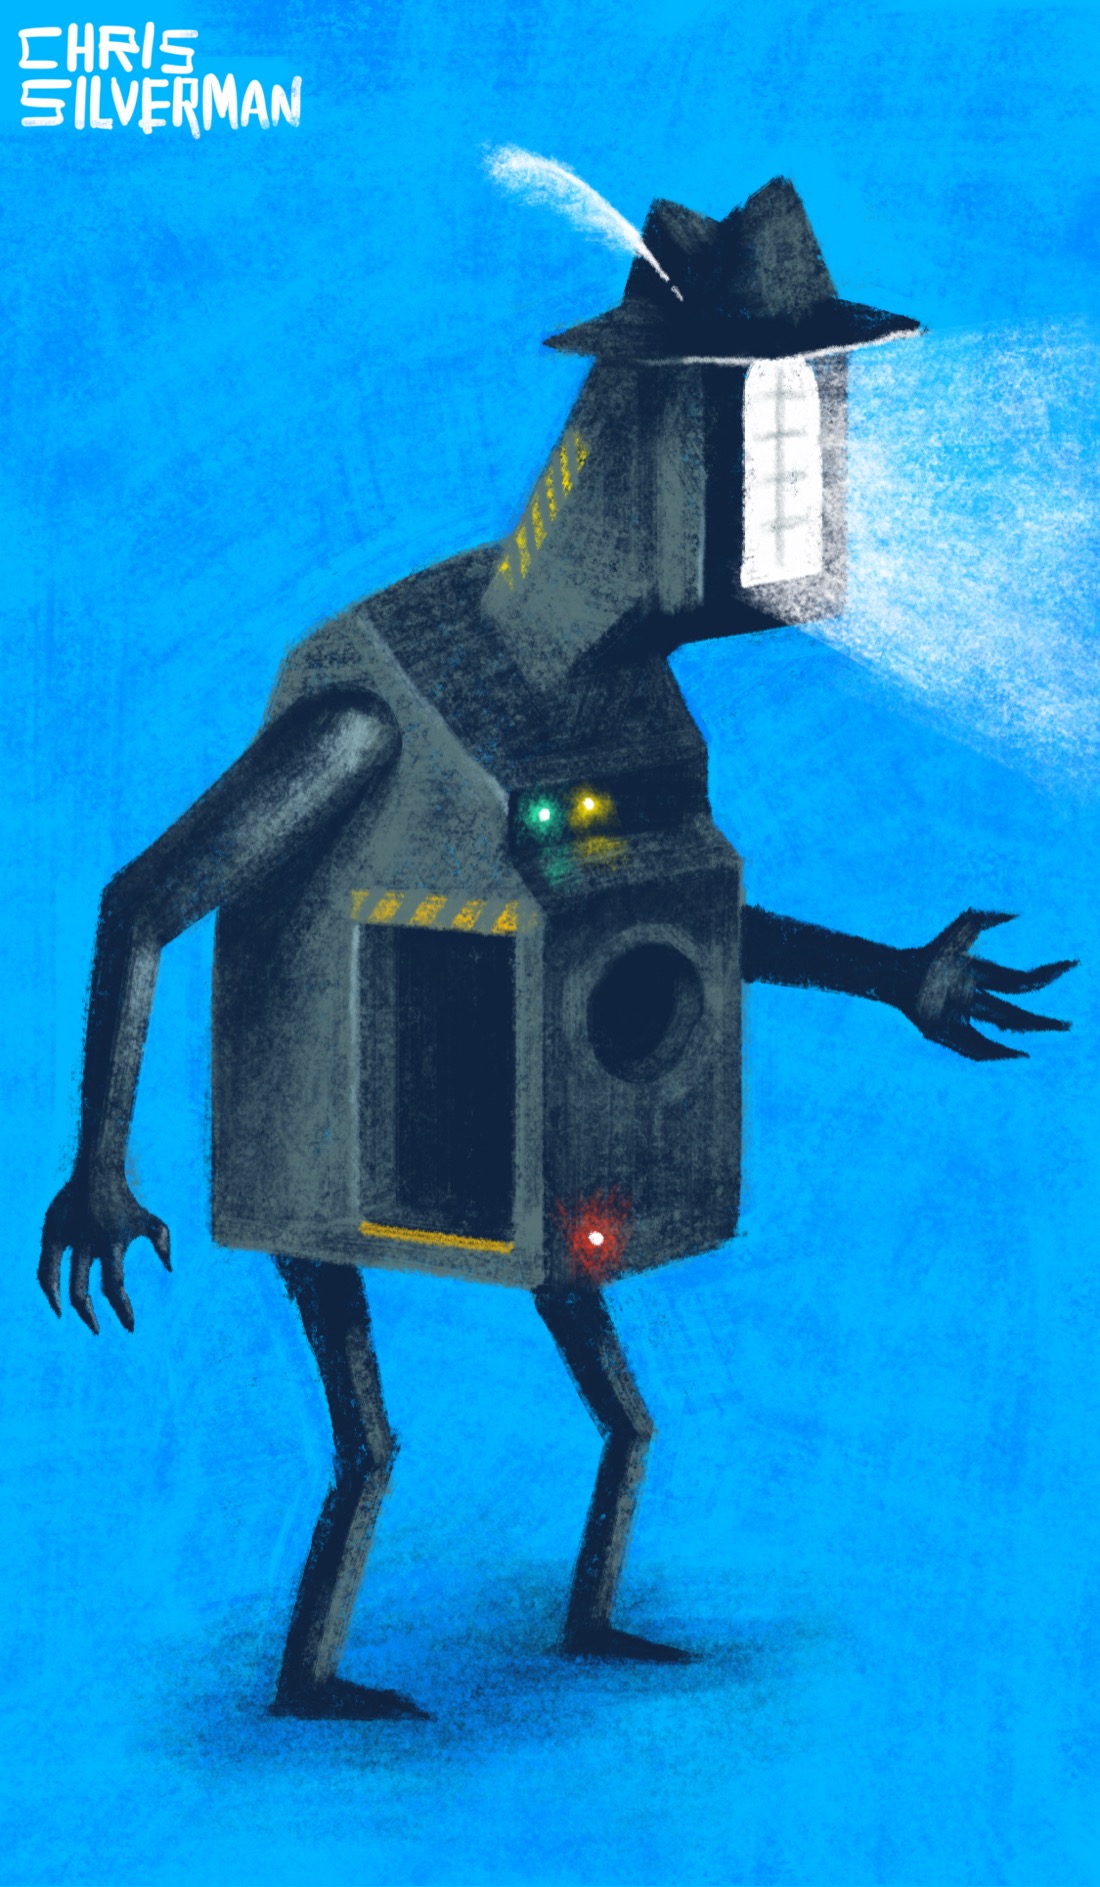 A boxy, robotic figure that resembles a steel shack with arms and legs. Its torso is the shack, with an open rectangular door on the right side and a round window in front. Also on the front of the robot are glowing colored lights. The door has yellow warning stripes above it. The robot has a boxy head on a long, boxy neck; its face is a glowing white window. It is wearing a brimmed hat with a white feather. Its neck also has yellow warning stripes. It is standing against a blue background.